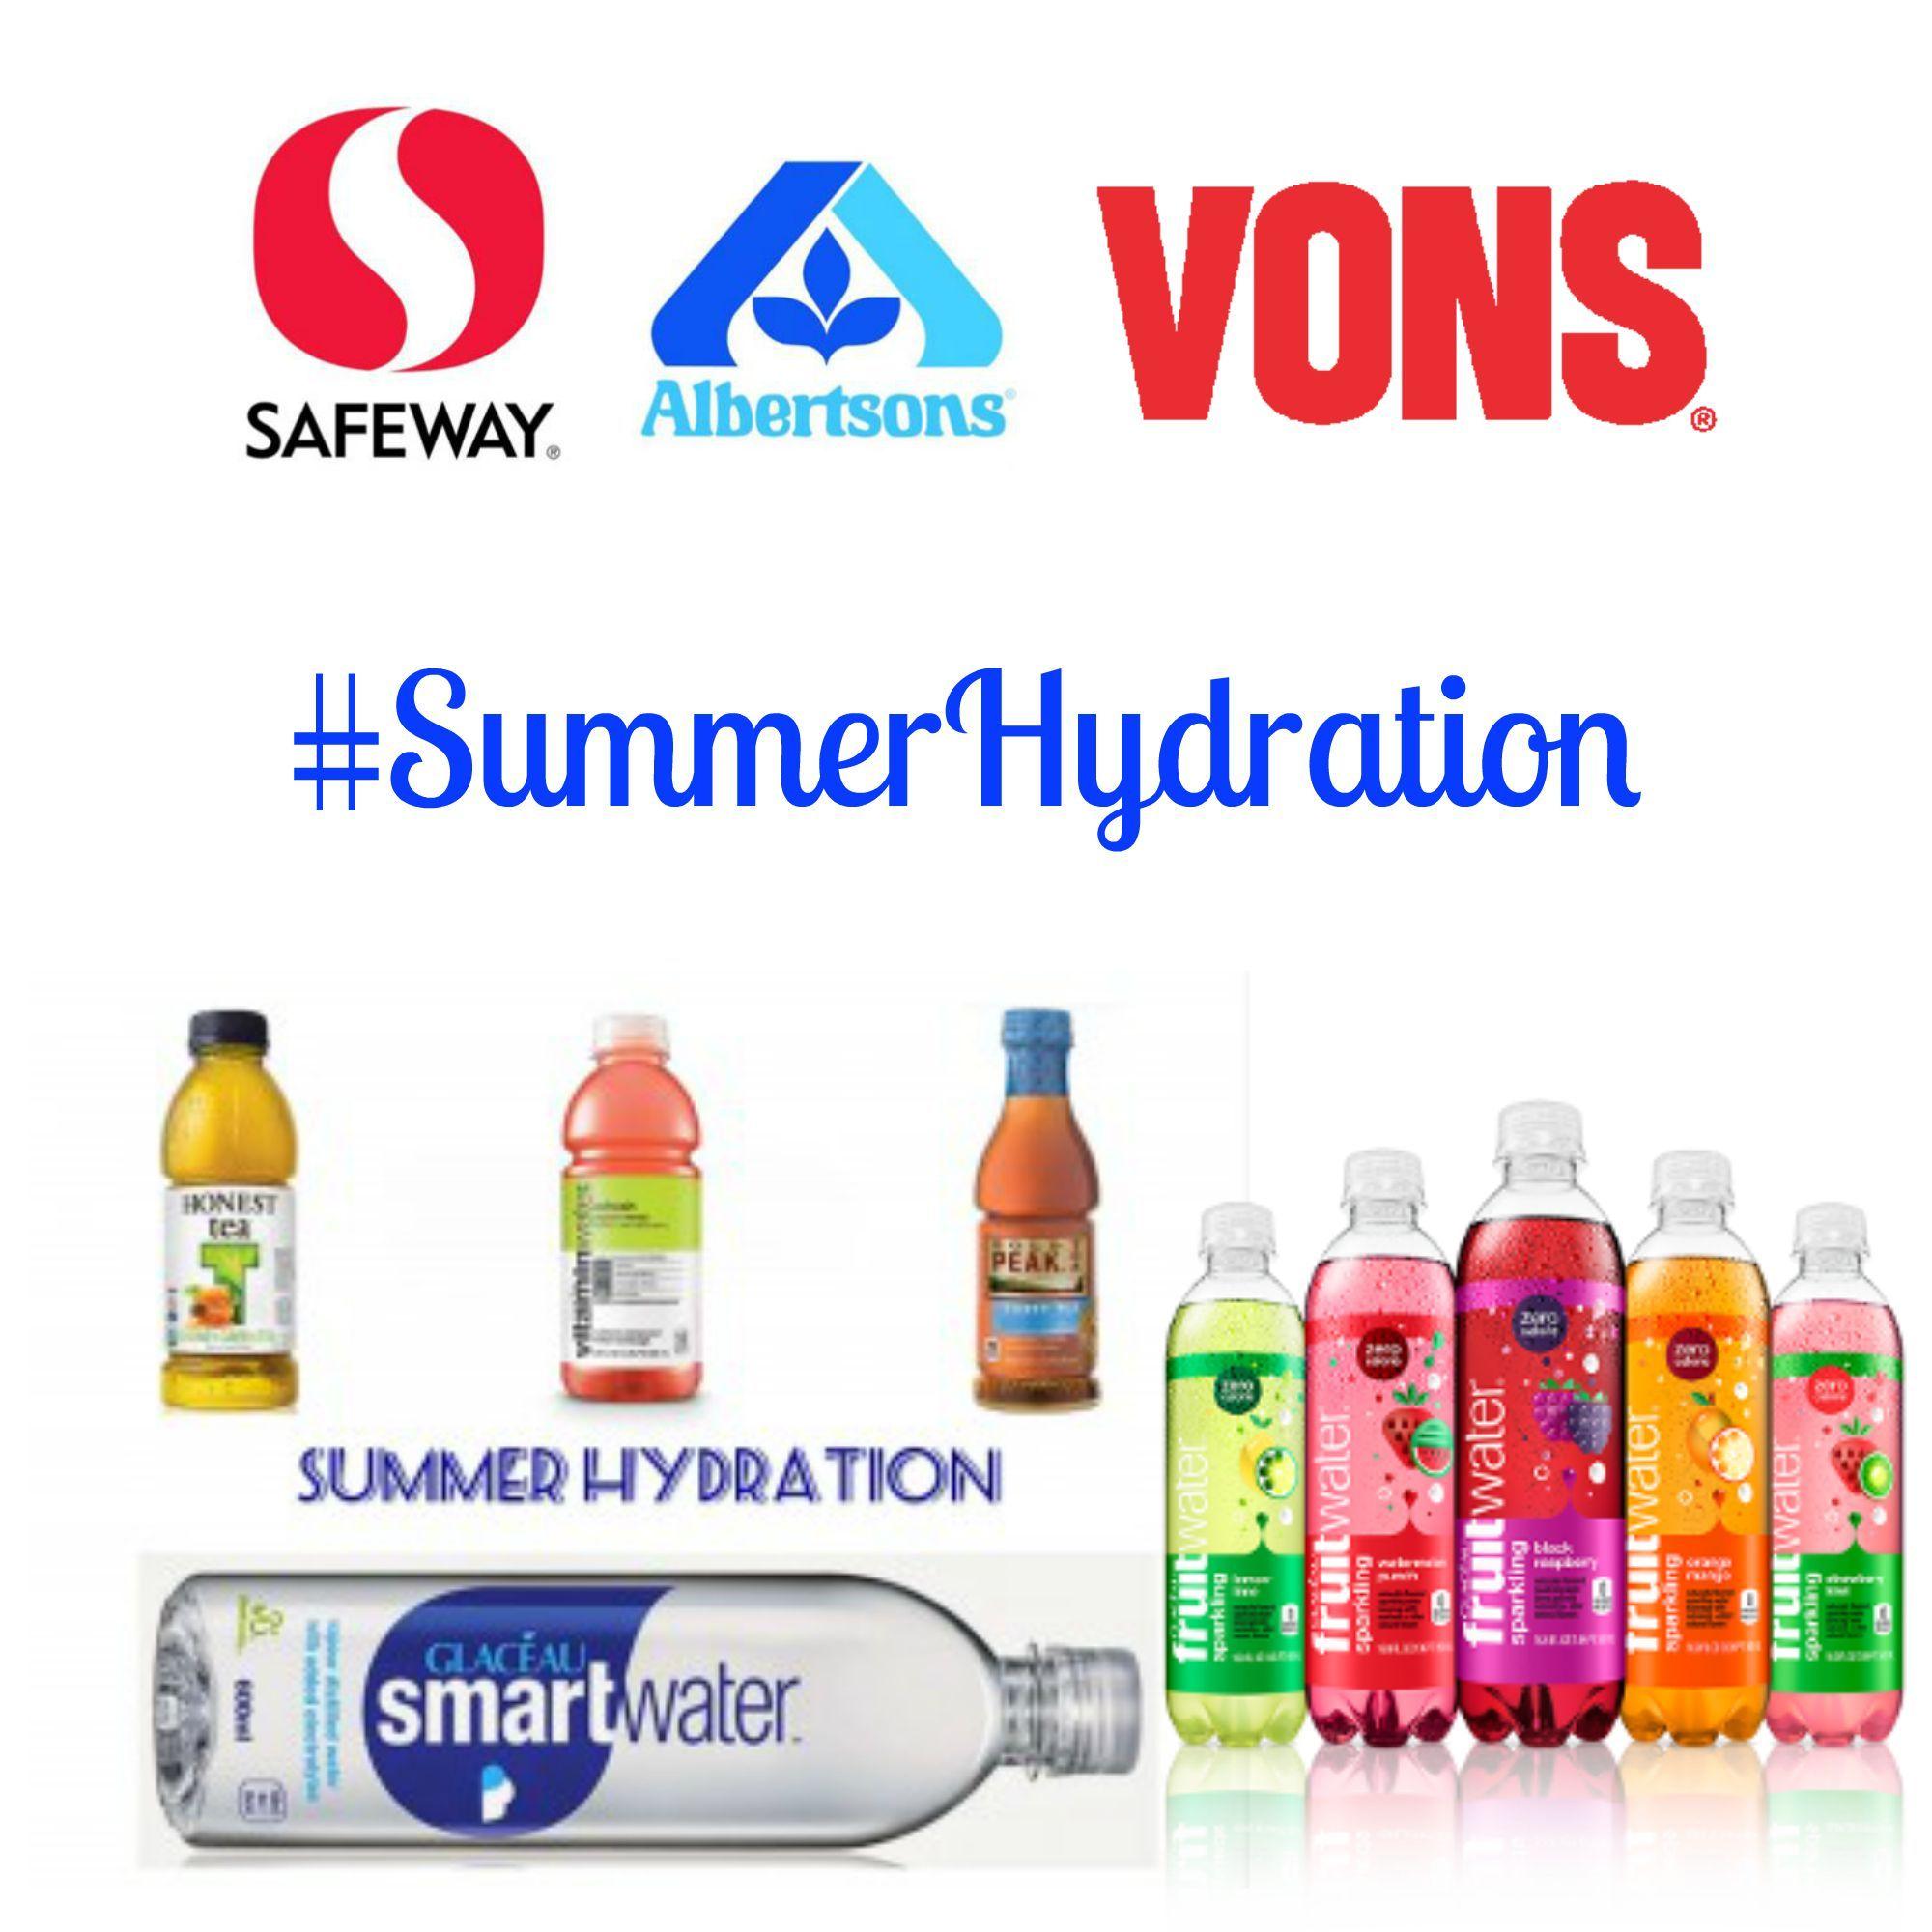 Albertsons Vons Logo - Safeway, Vons & Albertson Shoppers - Save $4 on Coca-Cola Products - FTM